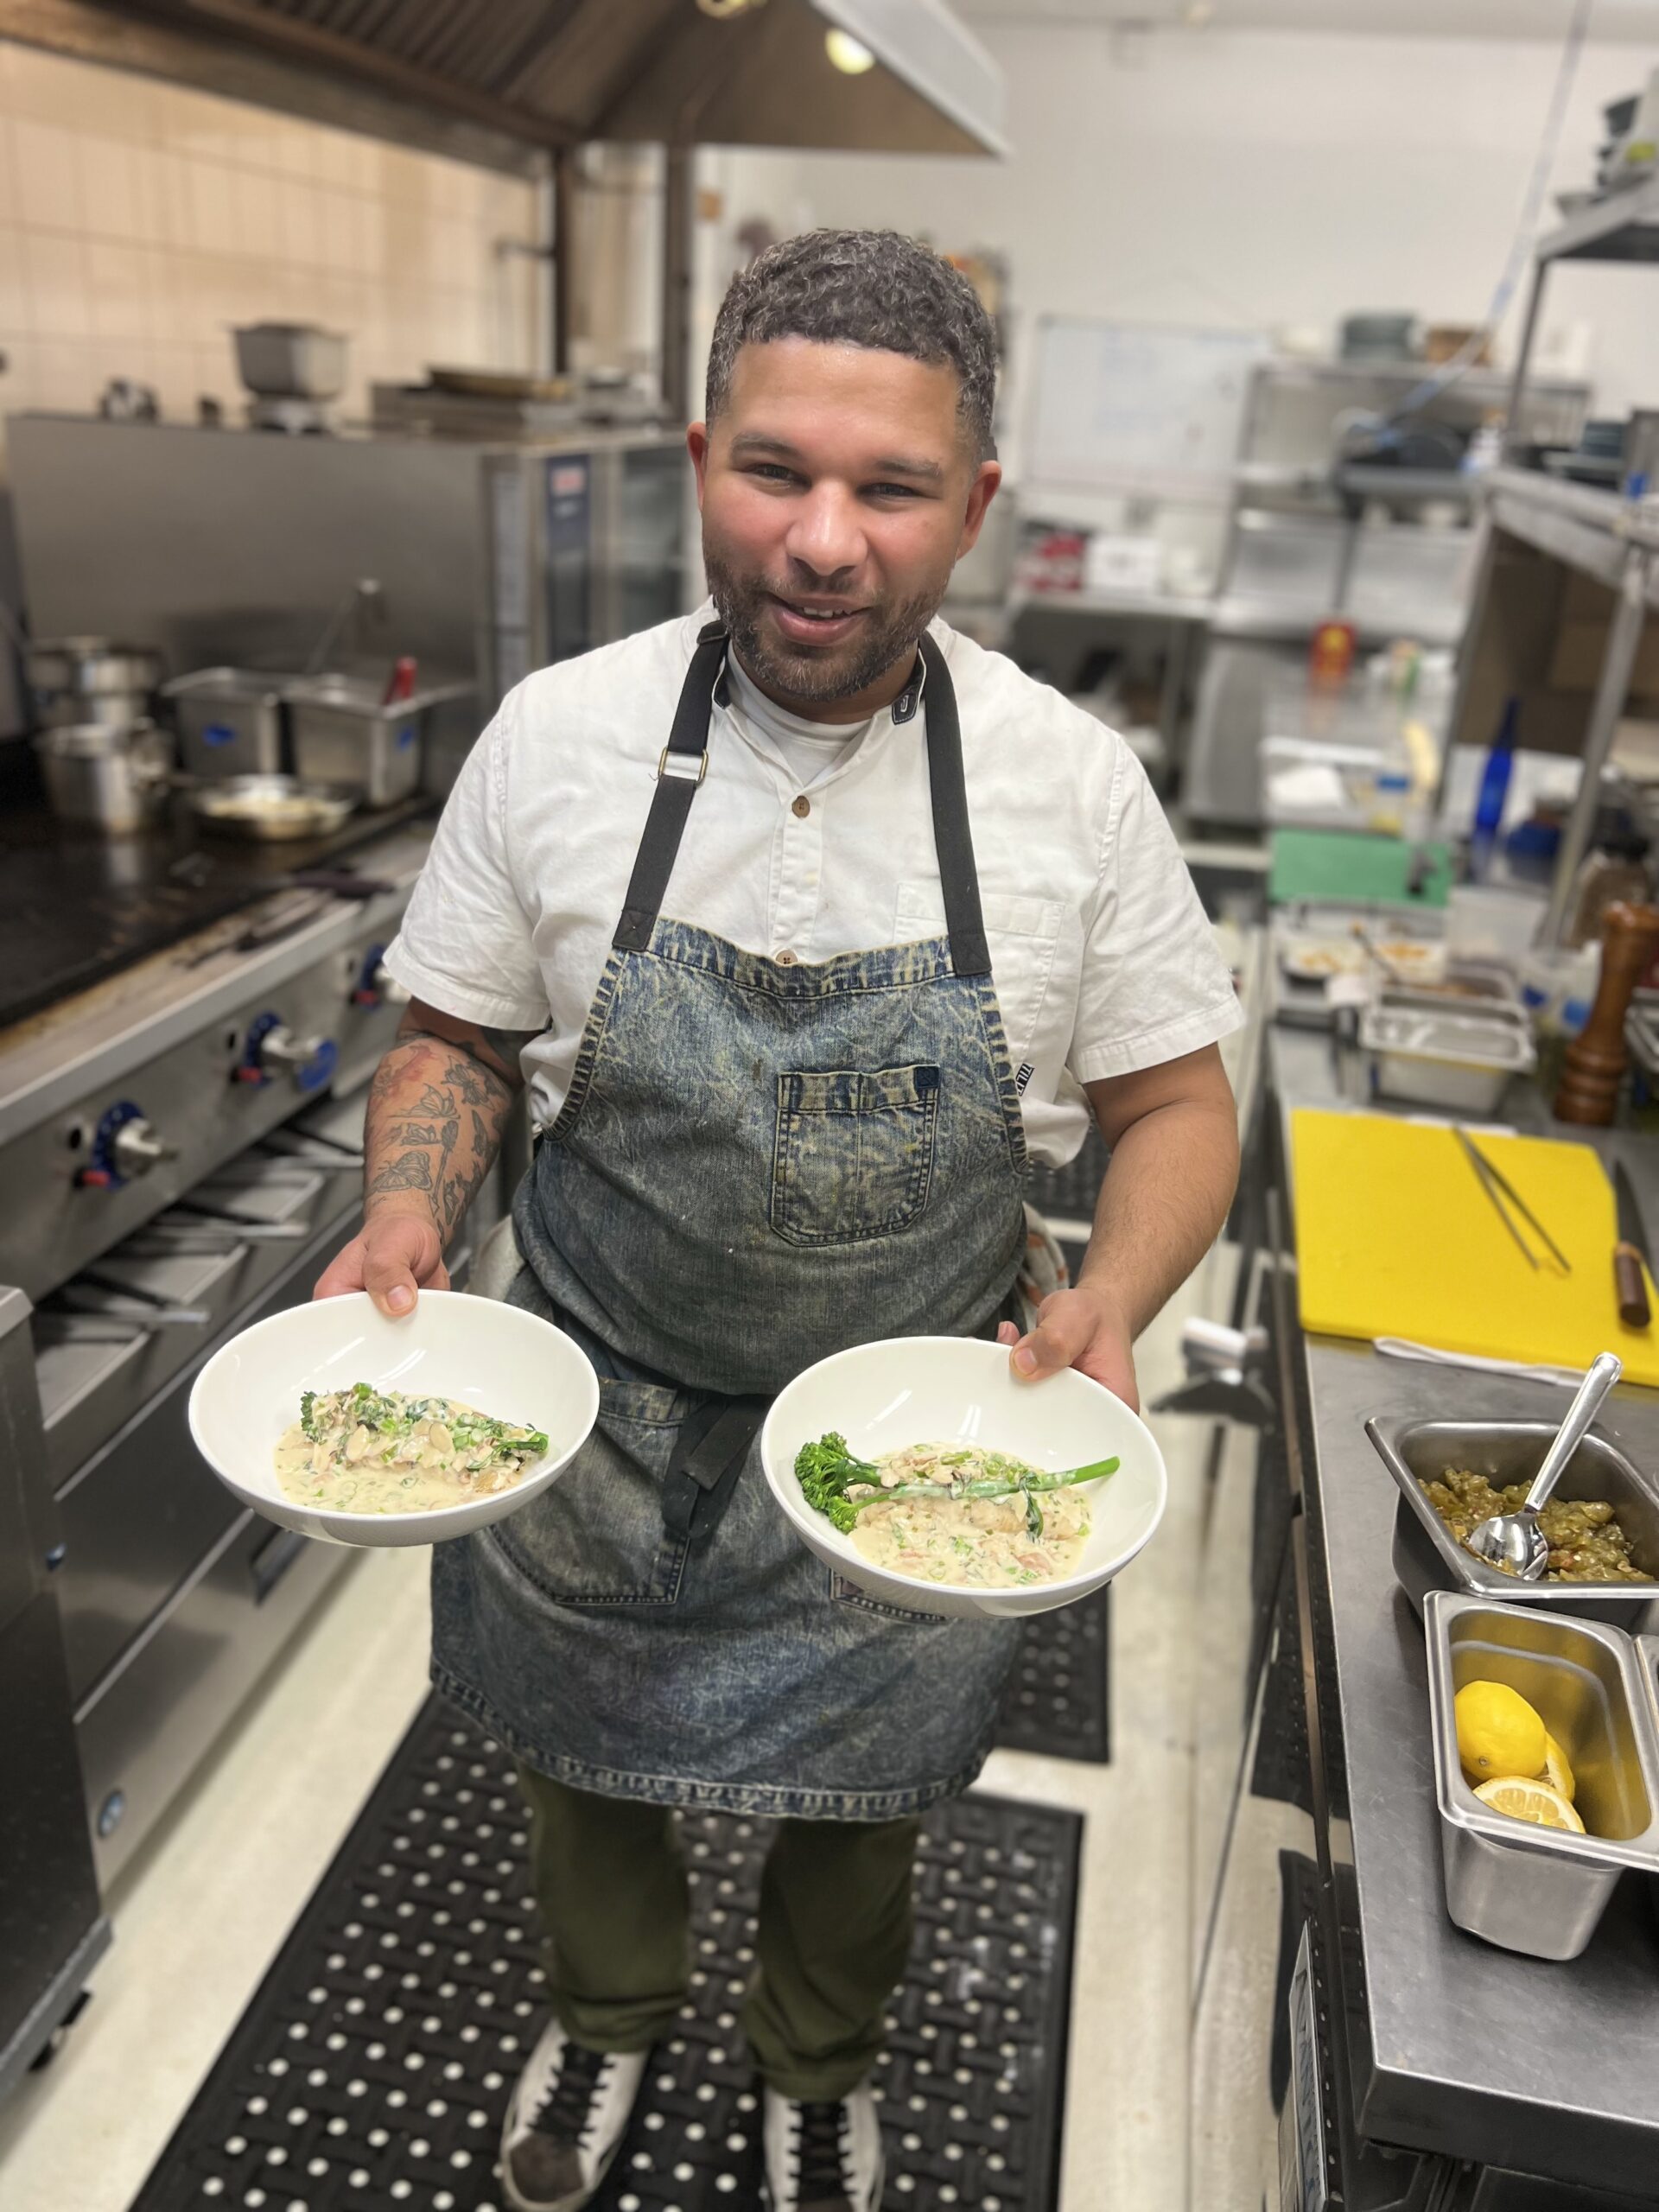 Chef Dominick Lee created upscale Creole cuisine on February 24 and 25 at Rosie's in Amagansett as part of The Roundtree’s winter culinary series. The New Orleans native will open his first New York restaurant, Alligator Pear, this spring. ELIZABETH VESPE